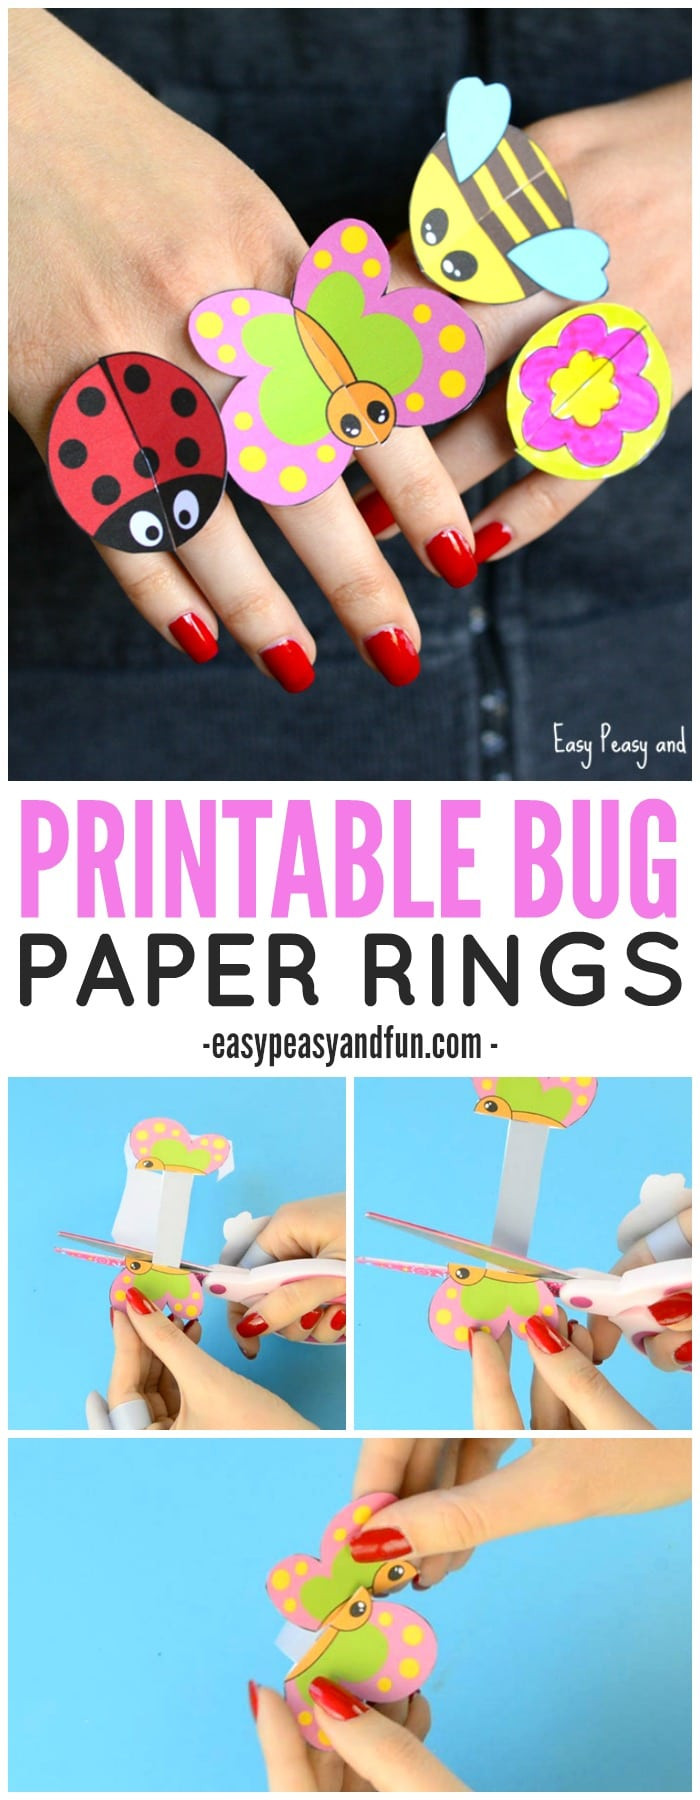 Printable Craft For Kids
 Printable Bug Paper Rings for Kids Craft Template Easy